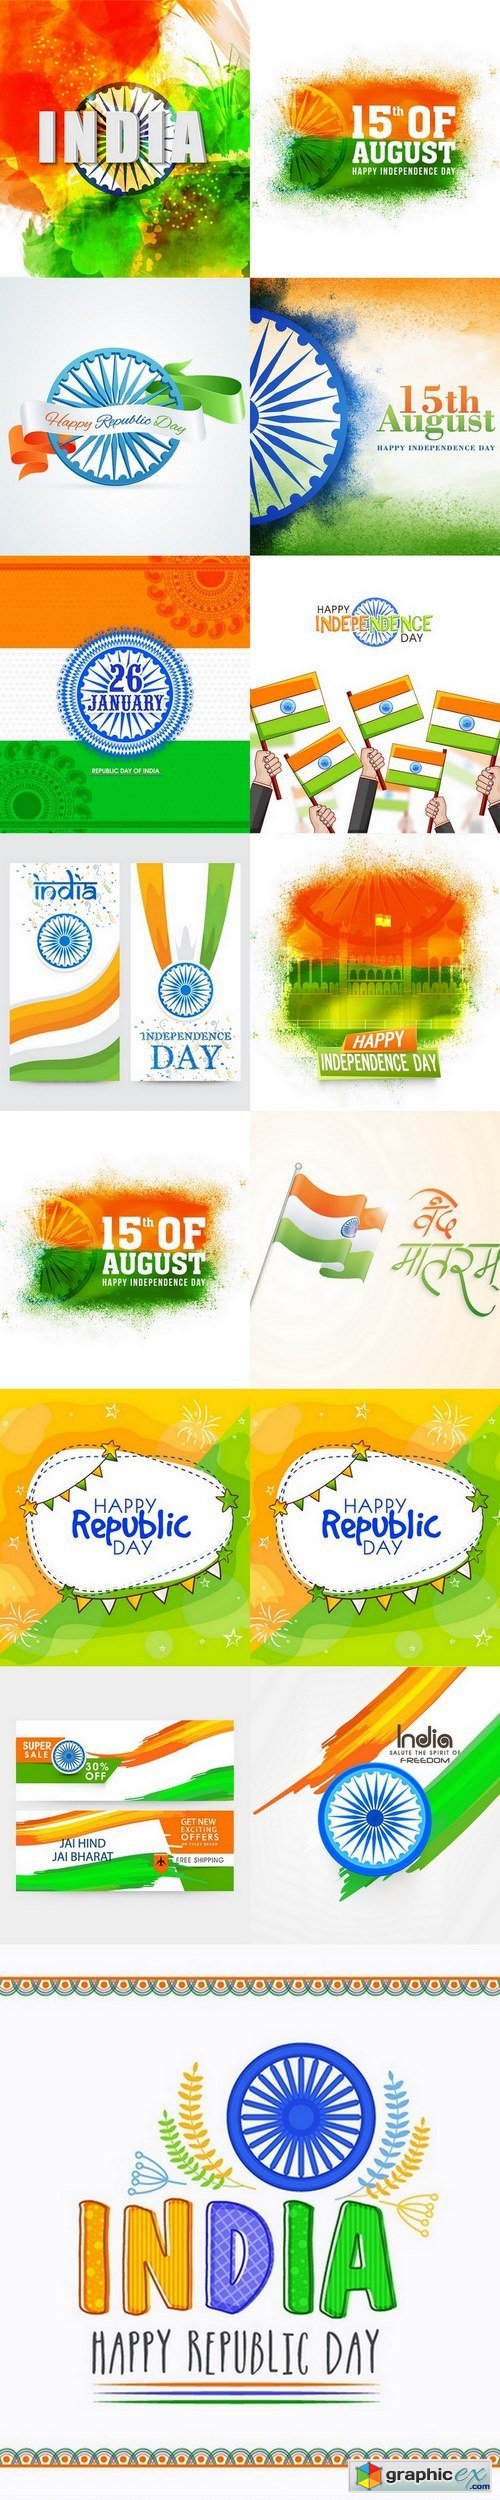 Decorative background with musical instruments for indian republic day 3